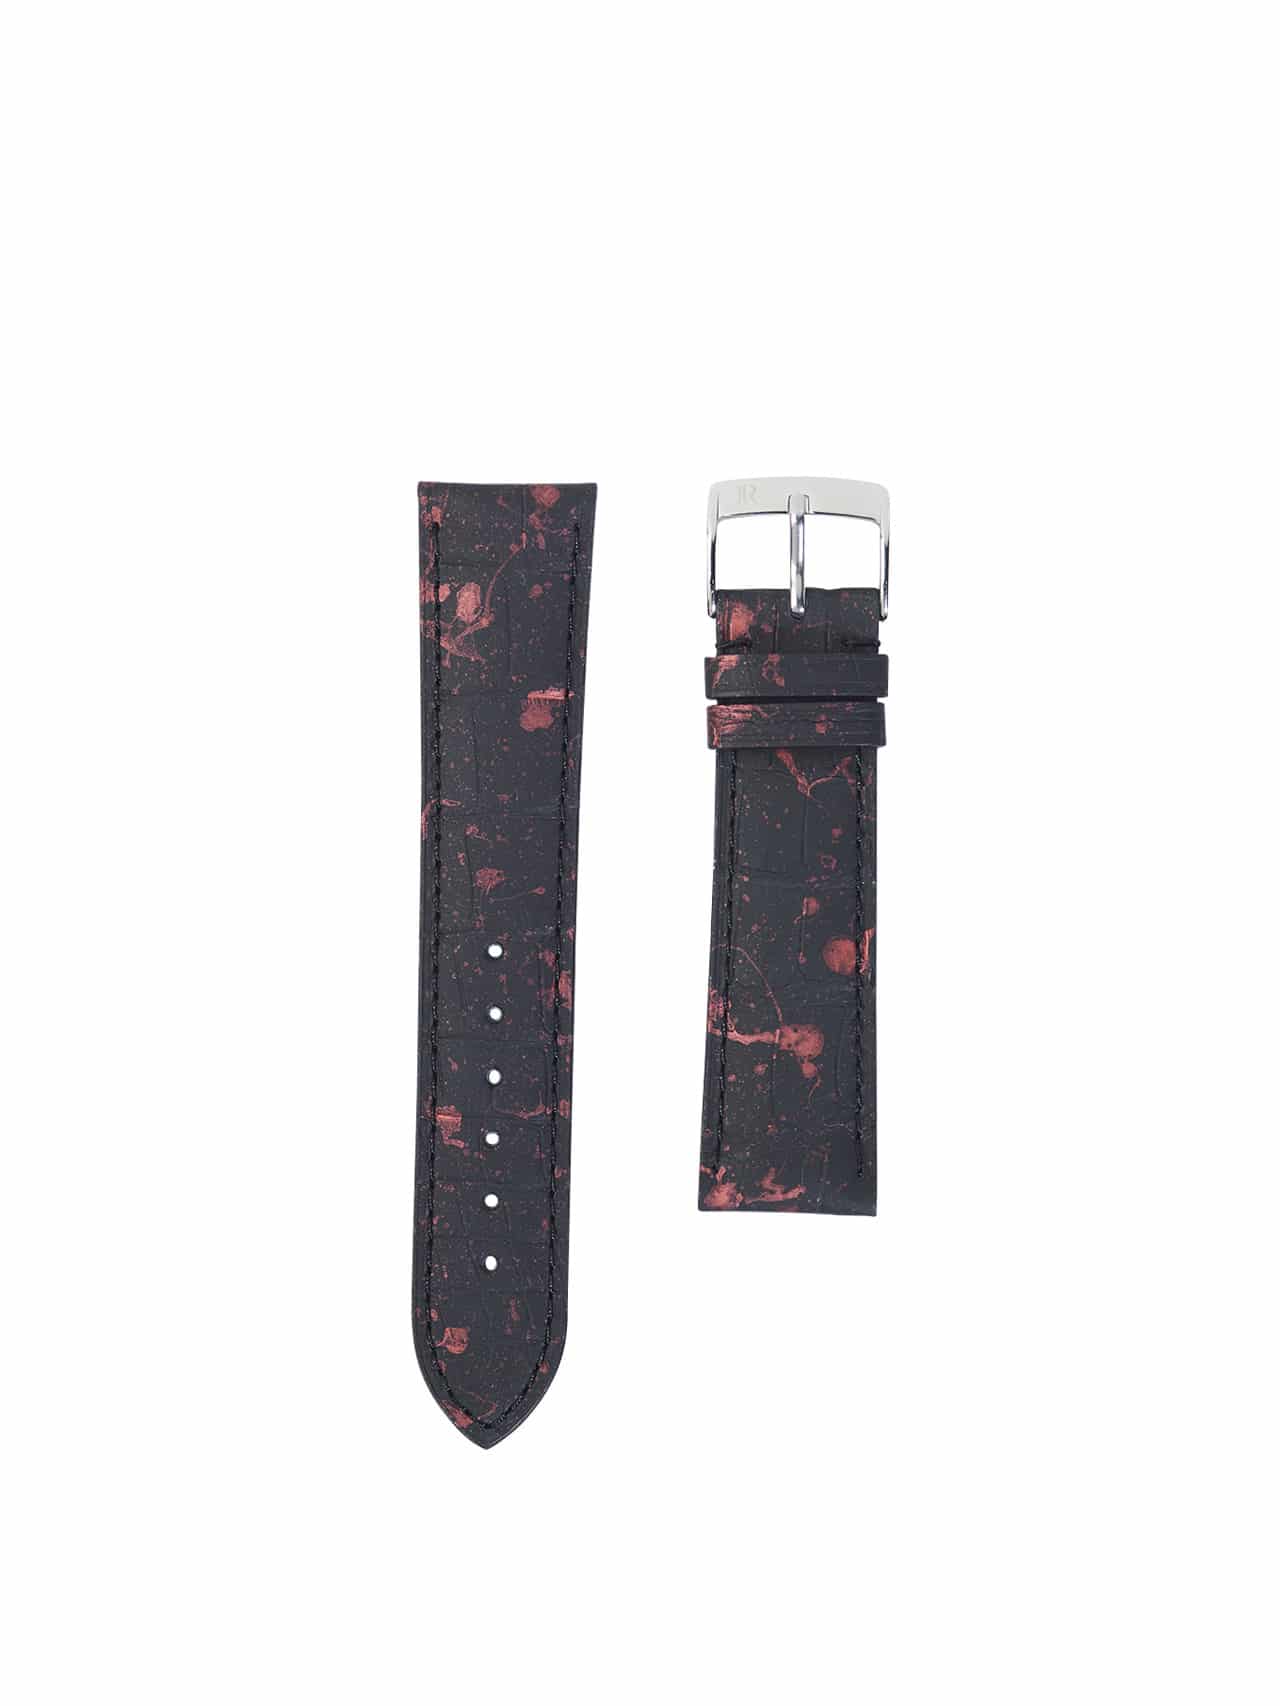 Watch strap 3.5 Asteria rubber touch crocodile pink front